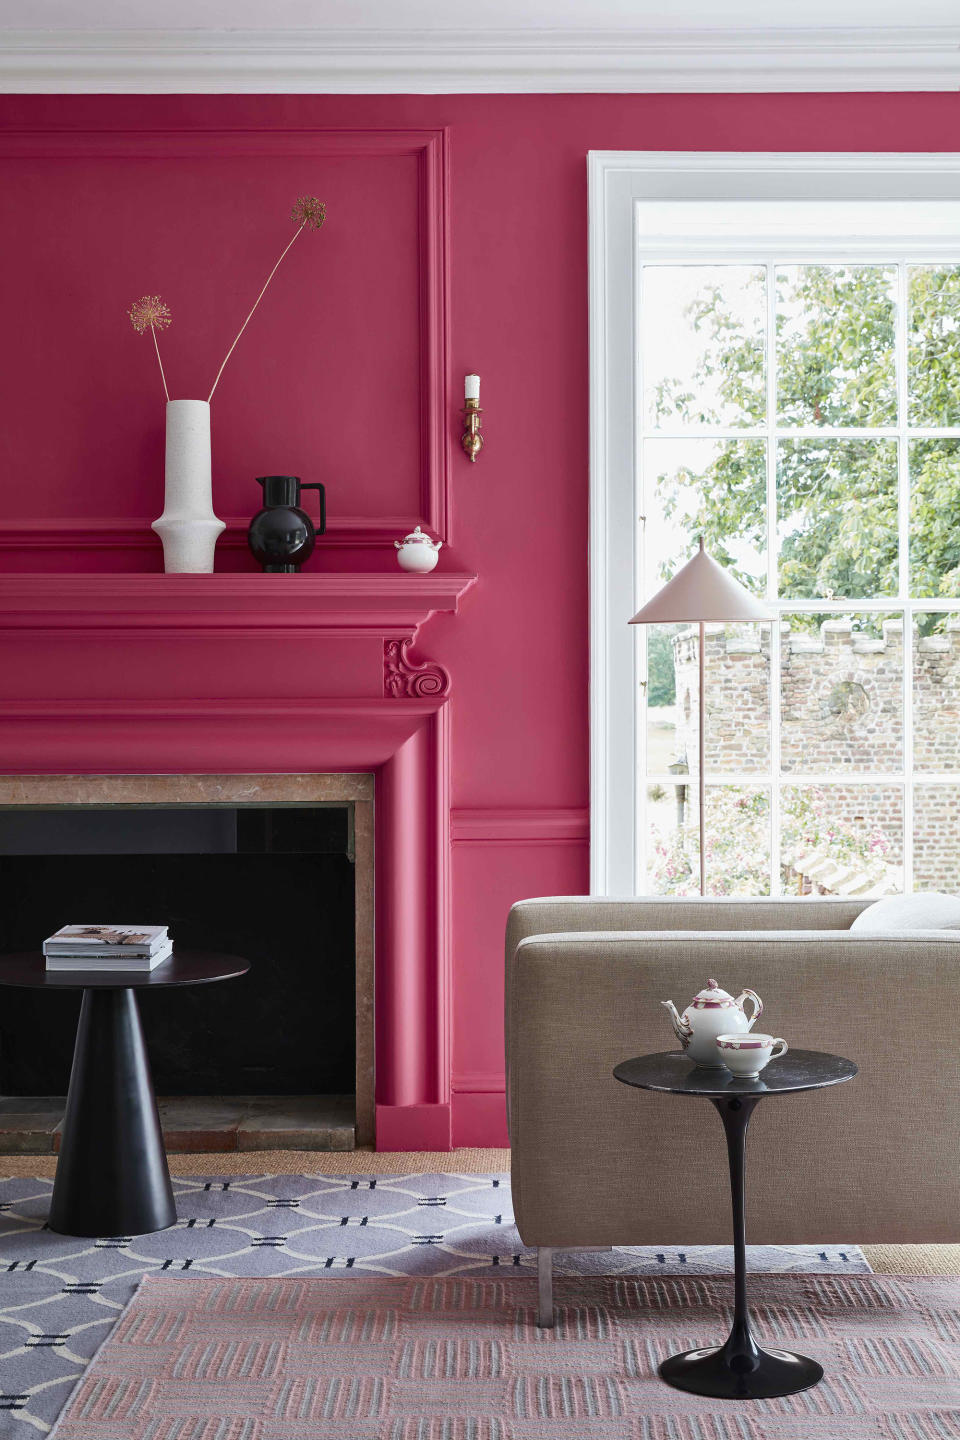 4. Create wow with hot pink